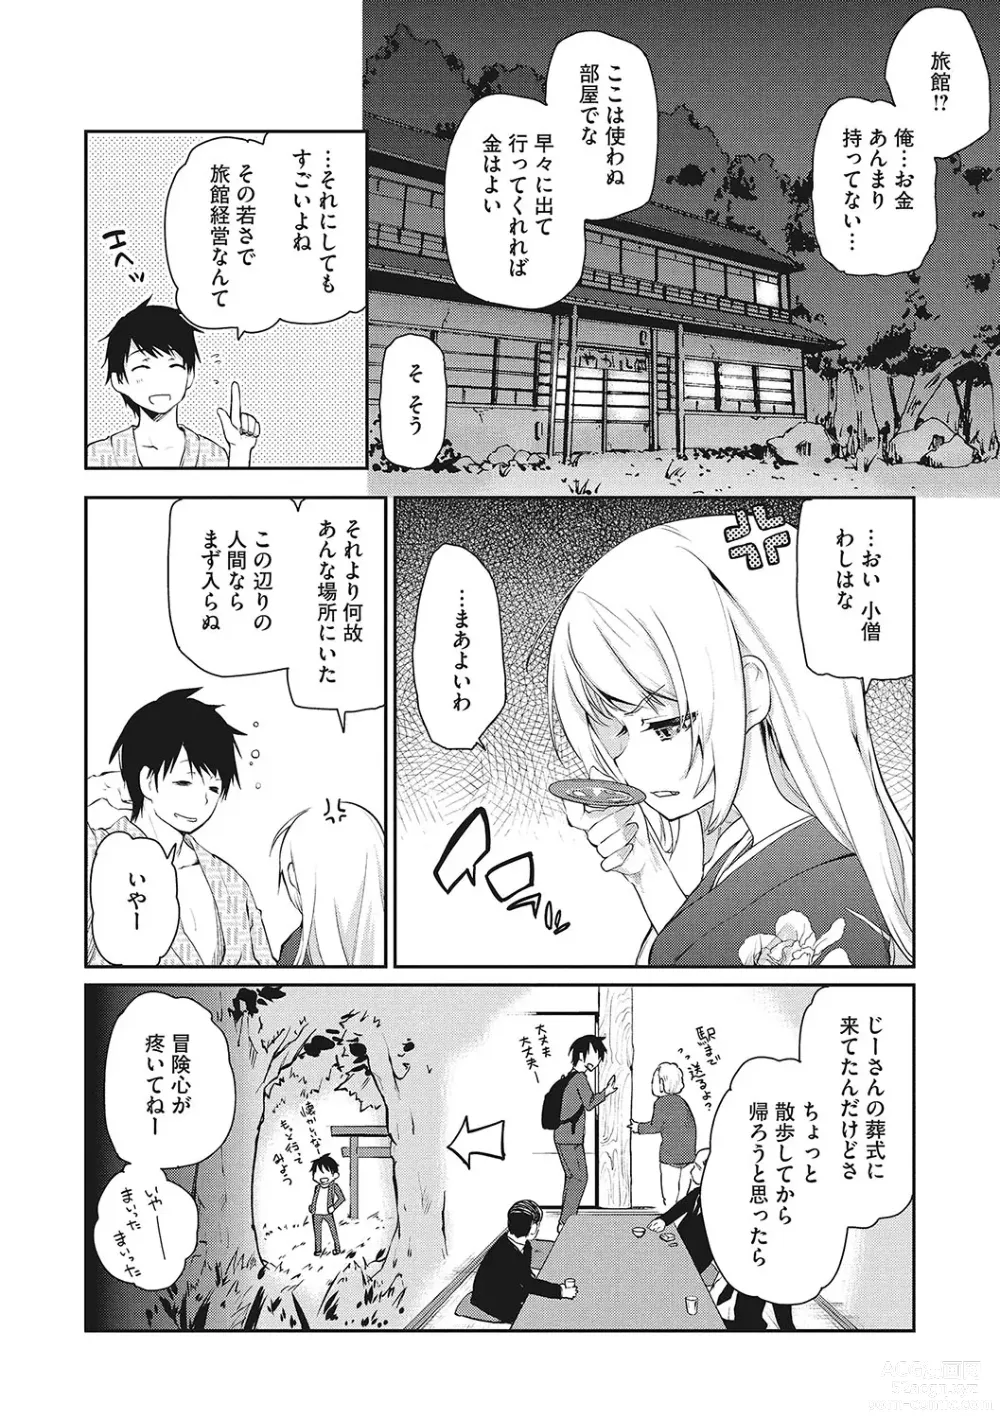 Page 13 of manga LQ -Little Queen- Vol. 54